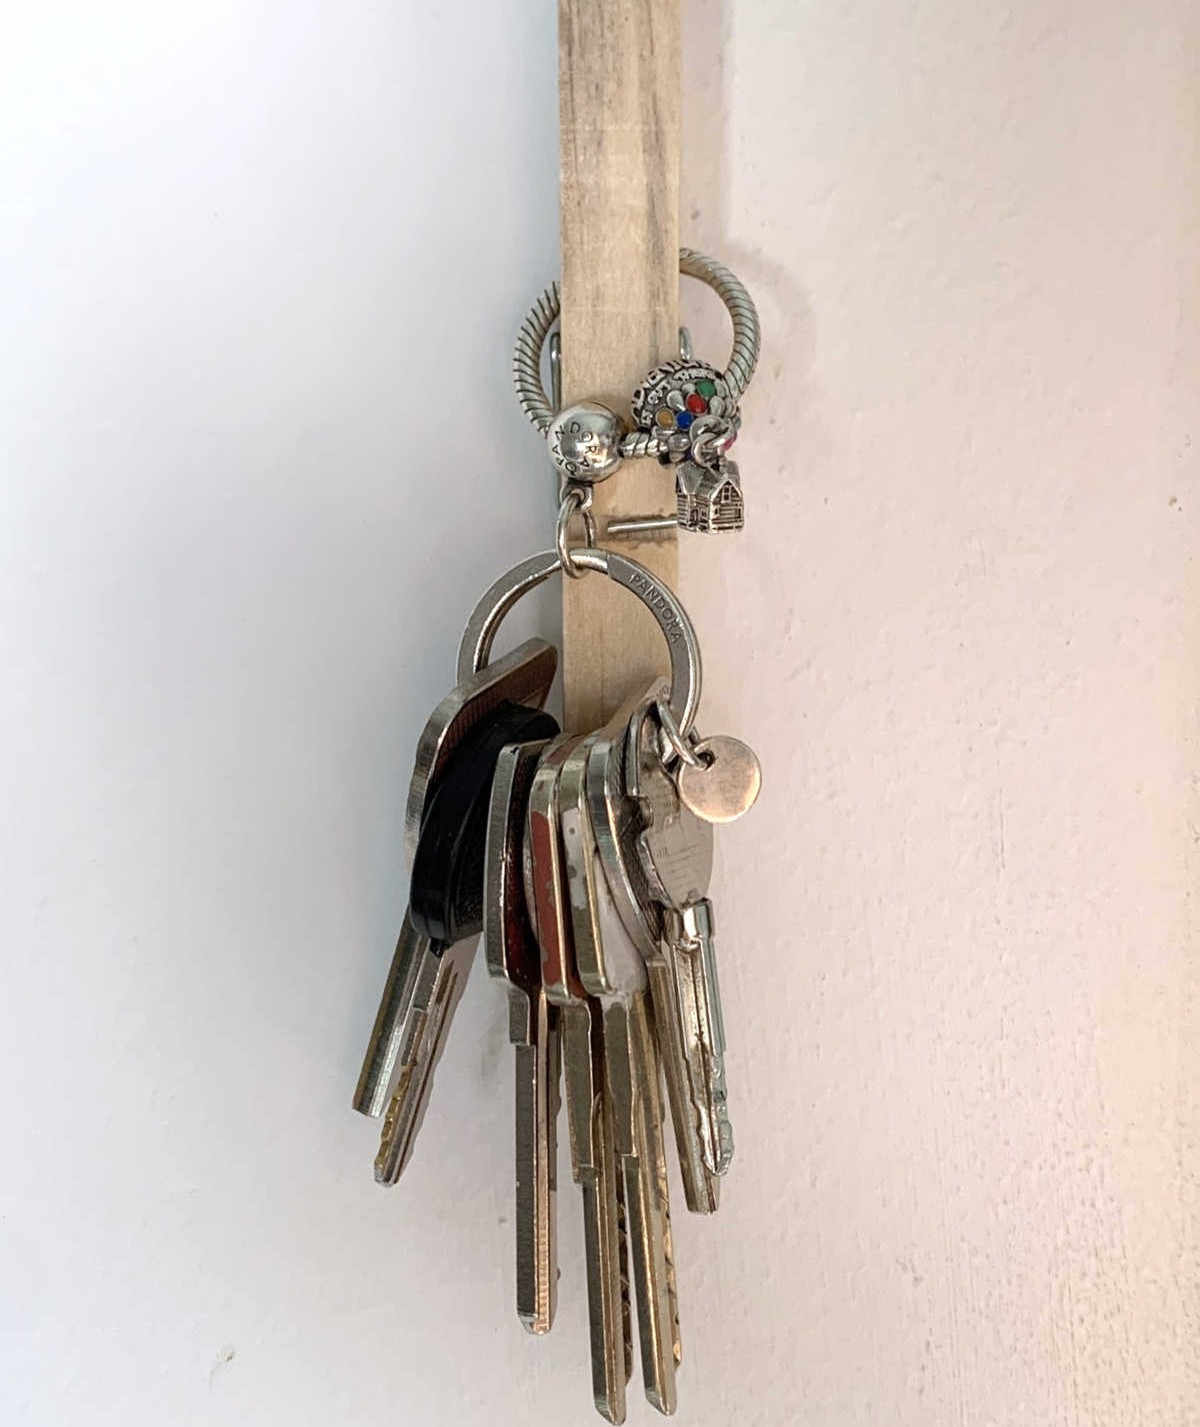 Use a Clothes Peg and Double-Sided Tape to Hang the Key